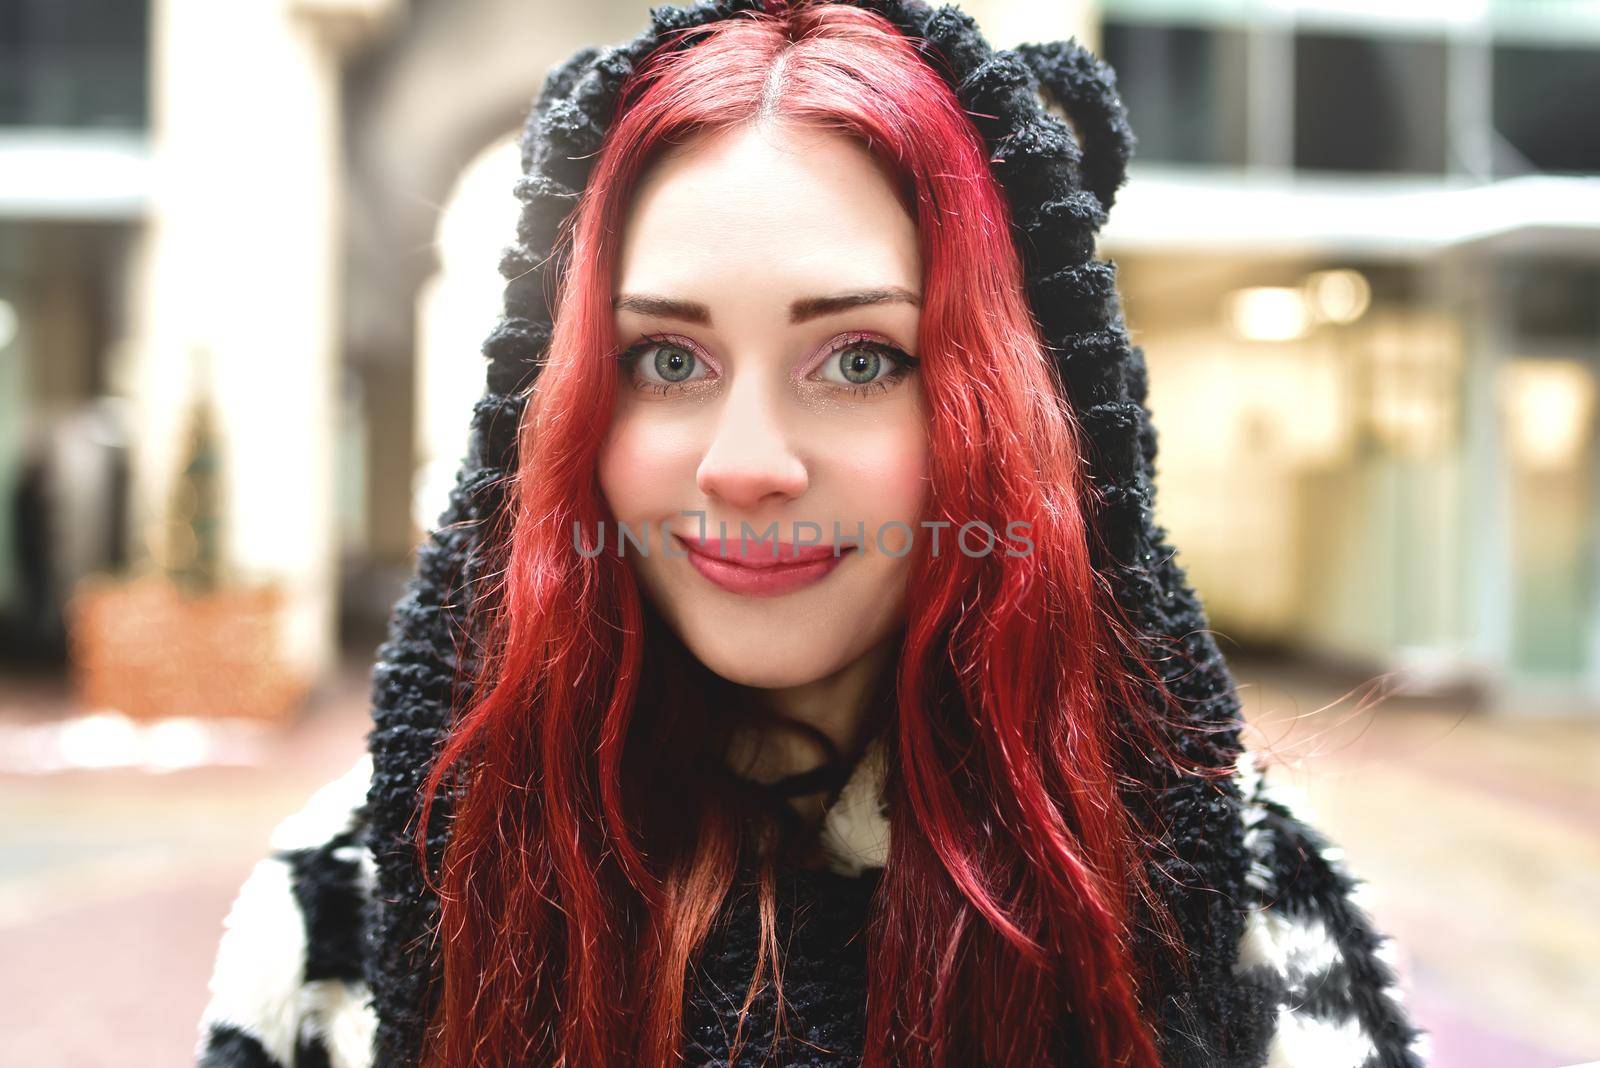 portrait of a smiling teen girl with red hair in warm clothes standing outside and looks into the camera by Nickstock